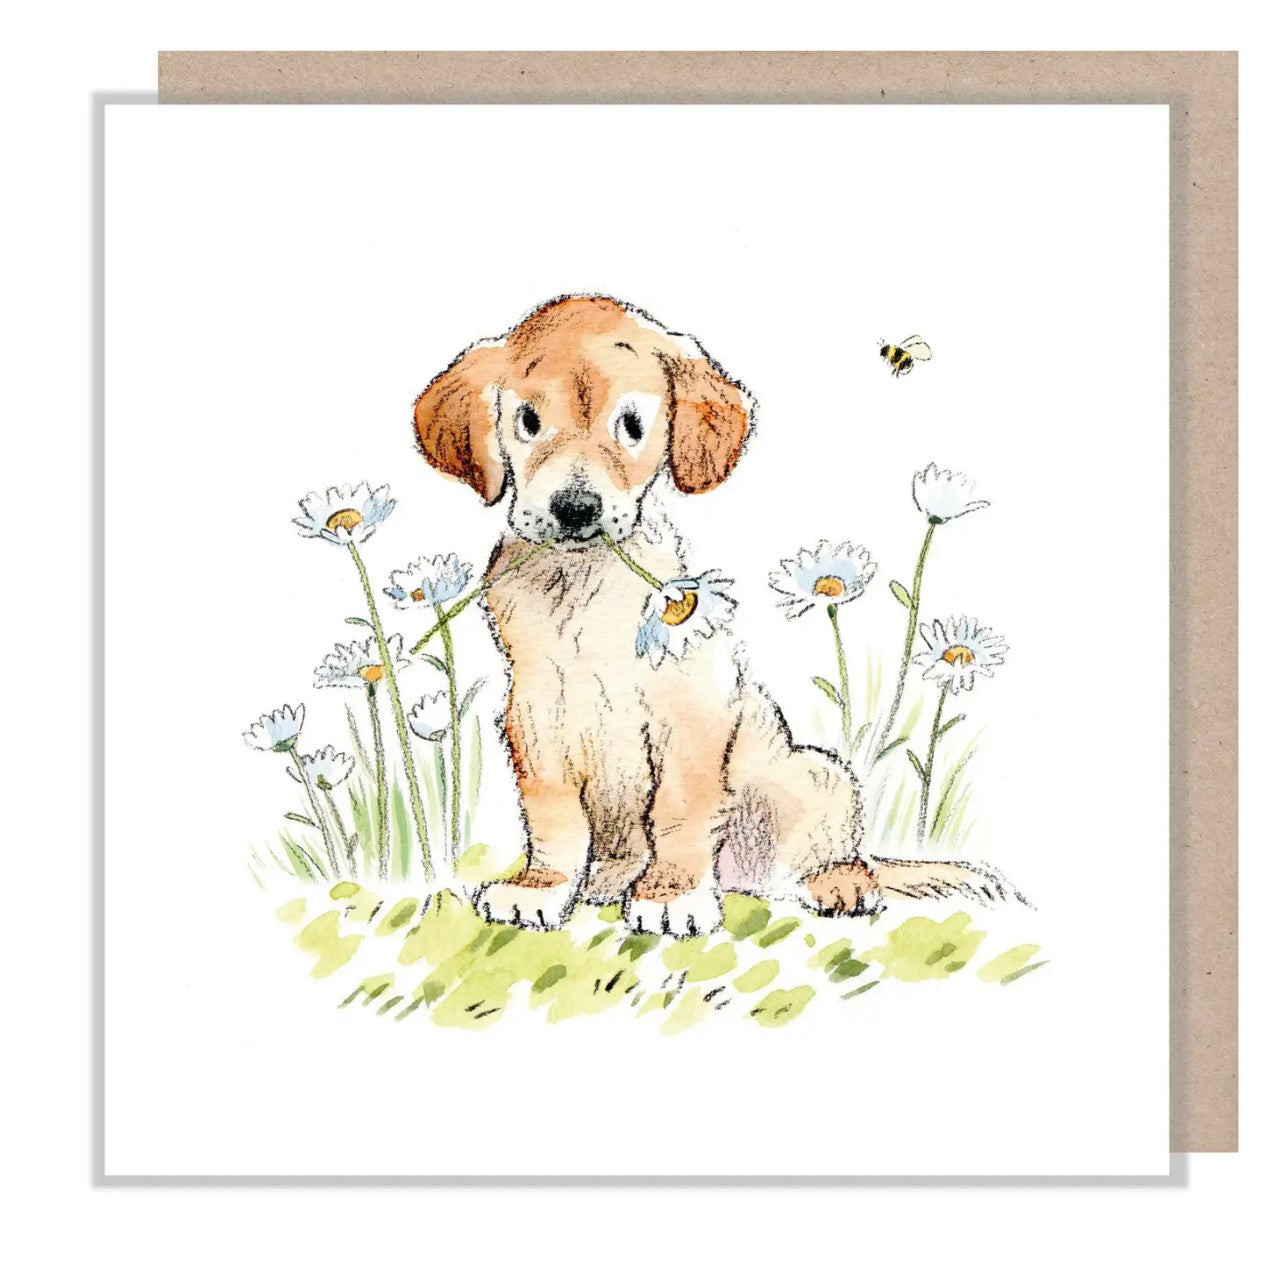 Golden Retriever with Daisy & Bee Greetings Card by Paper Shed Design Card 